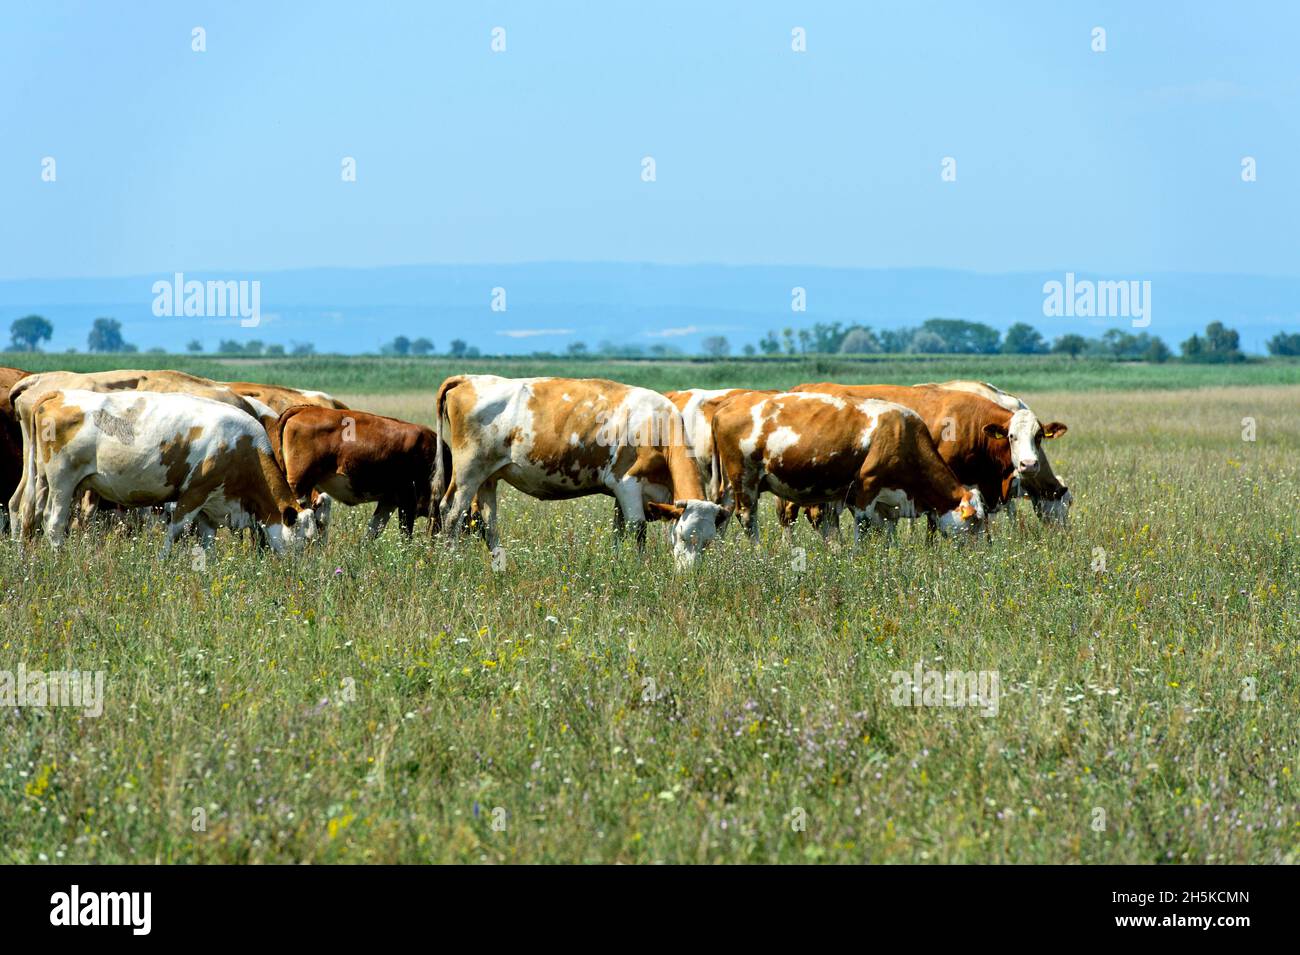 Herd Of Simmental Cattle On A Pasture In The Neusiedlersee -Seewinkel Nature Zone, Apetlon, Burgenland, Austria Stock Photo